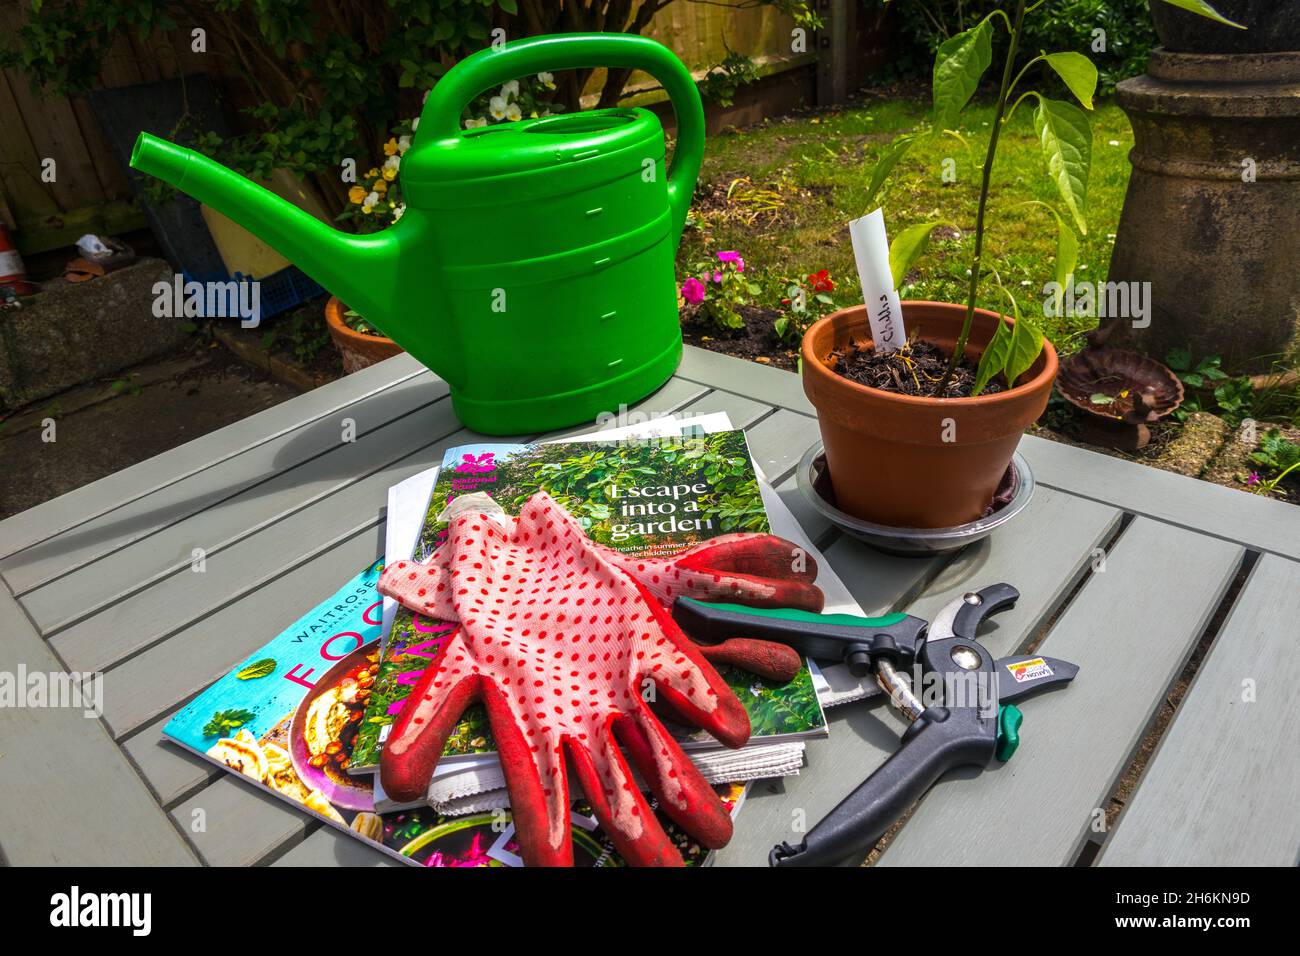 Lovely set up of garden equipment, magazines, gloves, watering can, cutters, a chili plant growing in a plant pot England Stock Photo